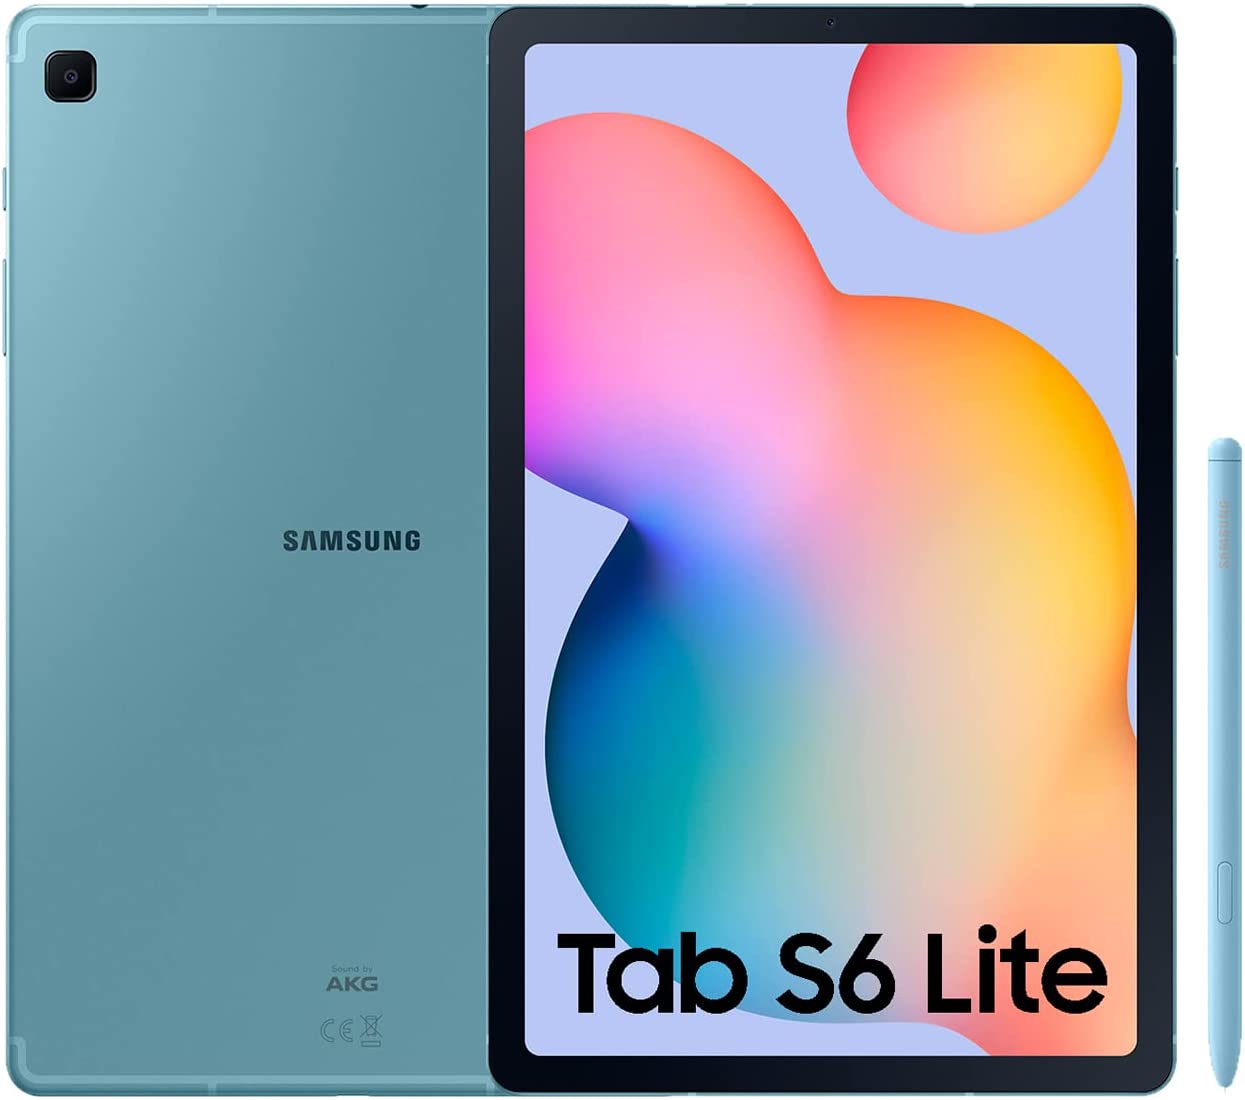 Latest Samsung Phones - List Of All Samsung Mobile Phones in (2022 